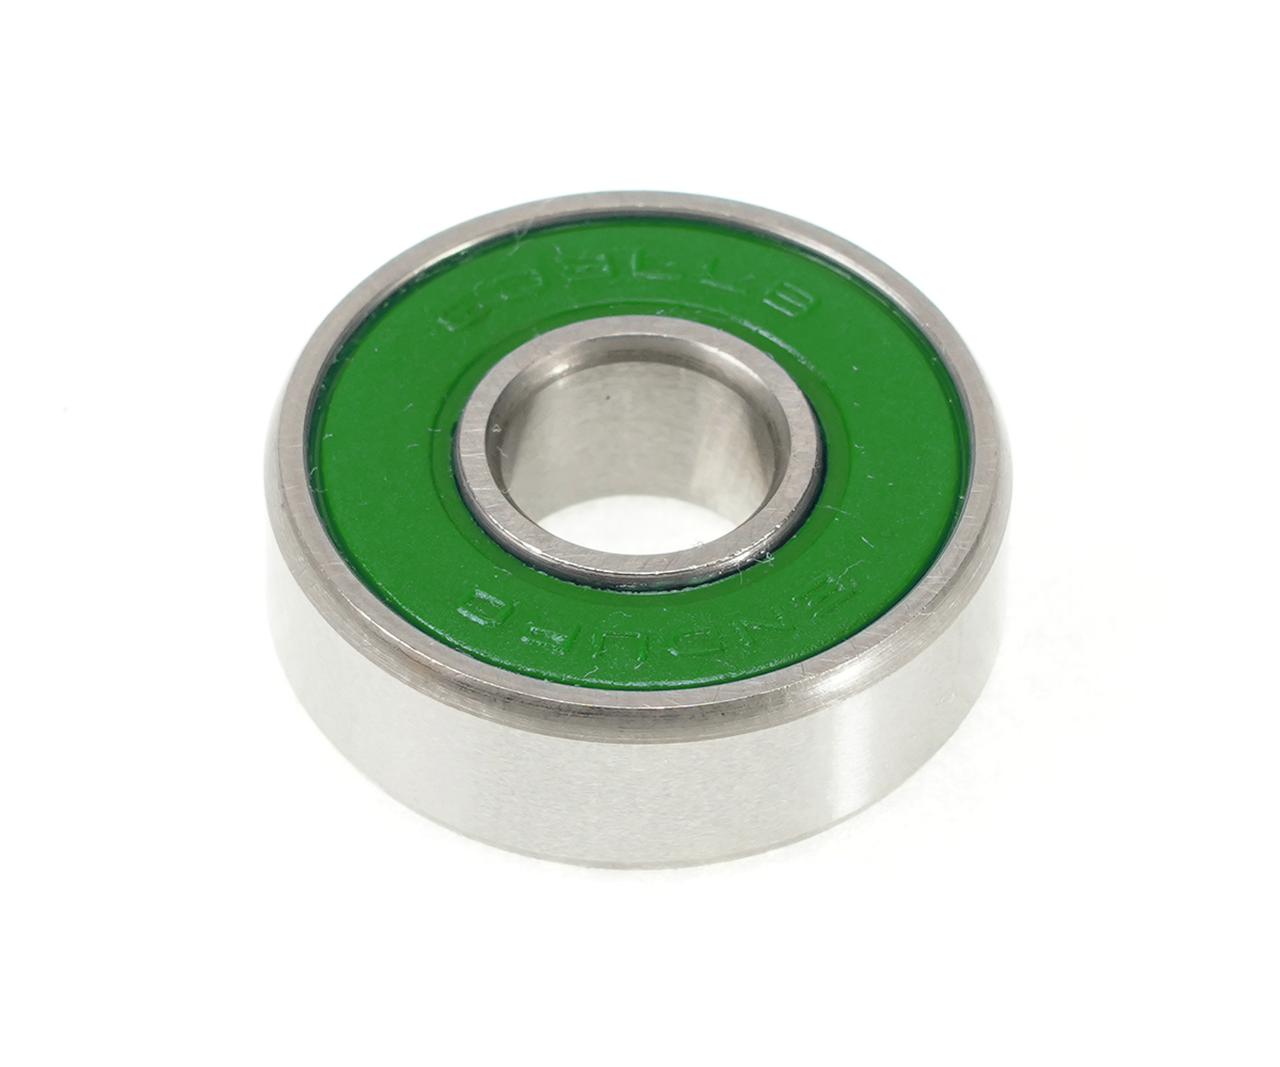 Enduro S608 LLB - Stainless Steel, Radial Bearing (C3 Clearance) - 8mm x 22mm x 7mm